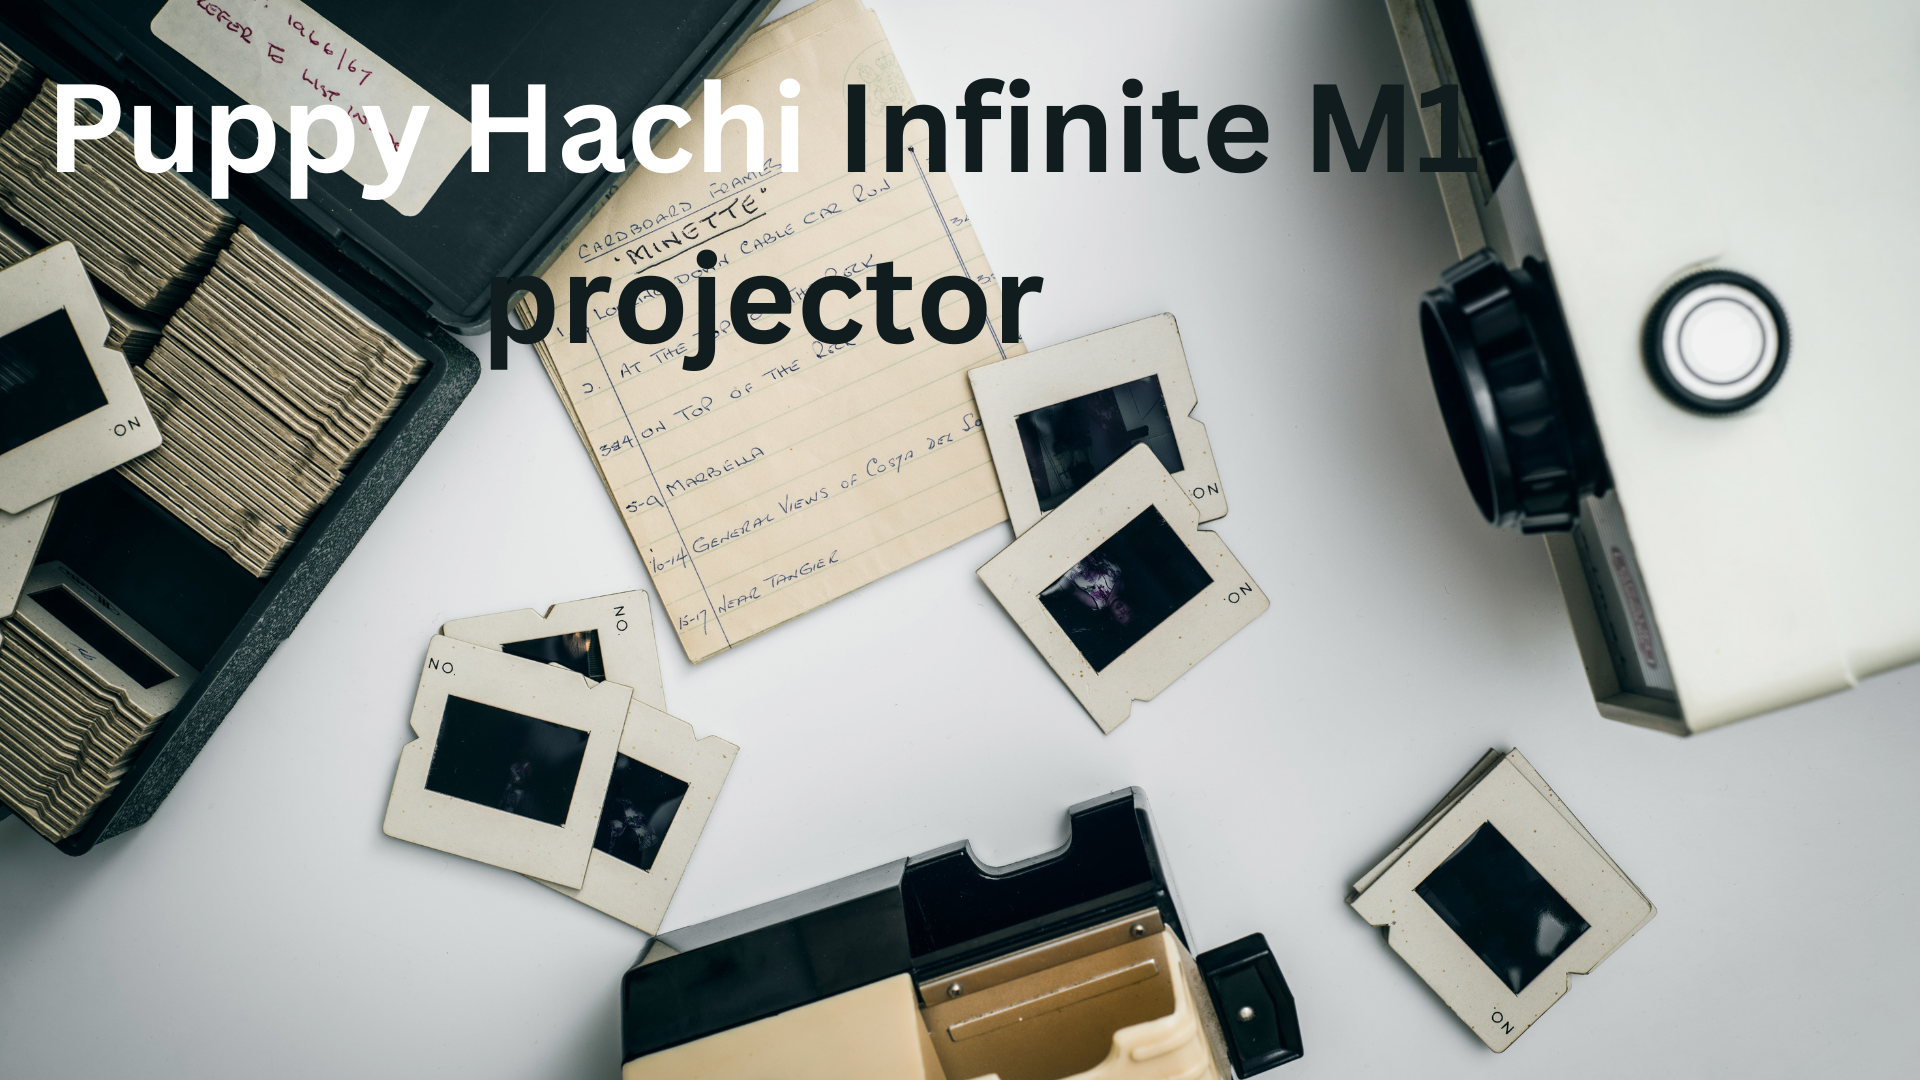 Puppy Hachi Infinite M1 projector: Complete Review 2023